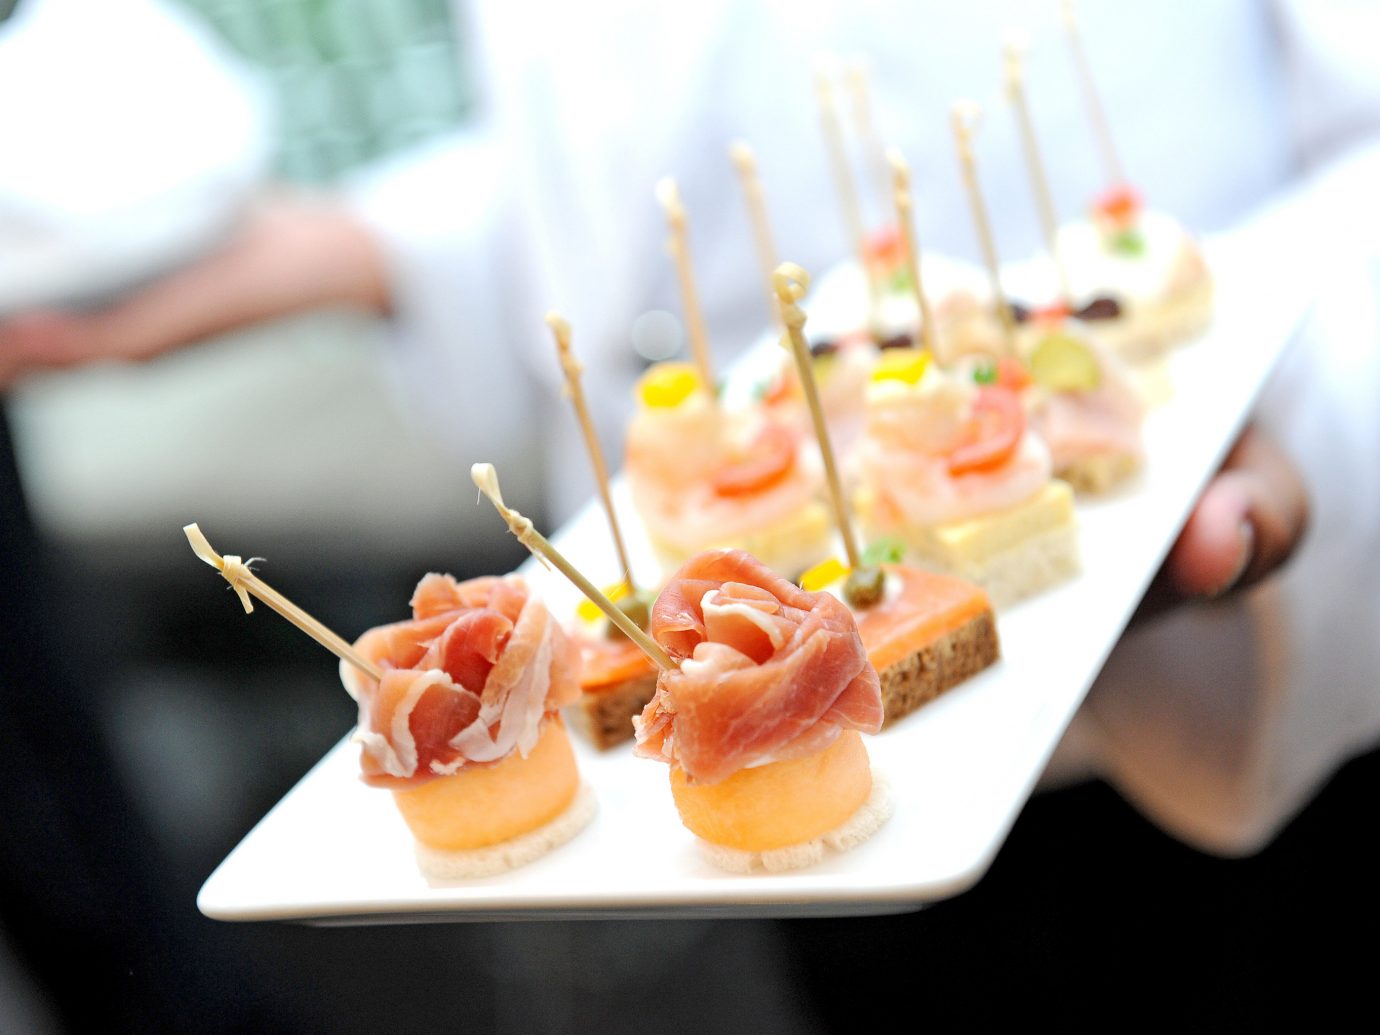 Food + Drink food dish plate meal hors d oeuvre brunch restaurant cuisine lunch pincho breakfast culinary art sense sushi